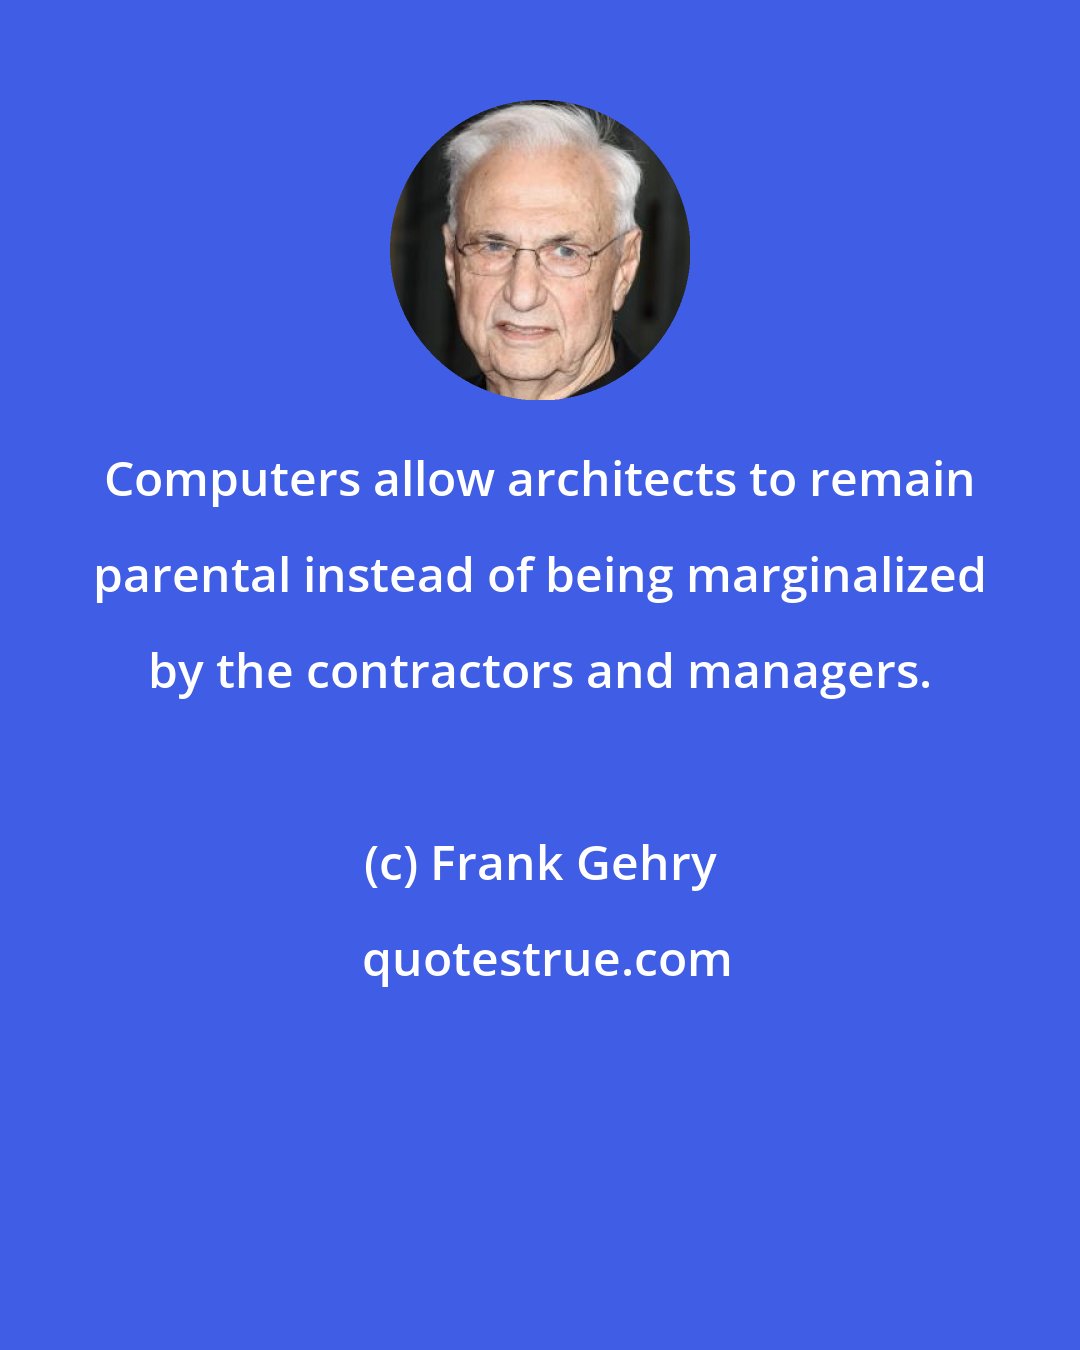 Frank Gehry: Computers allow architects to remain parental instead of being marginalized by the contractors and managers.